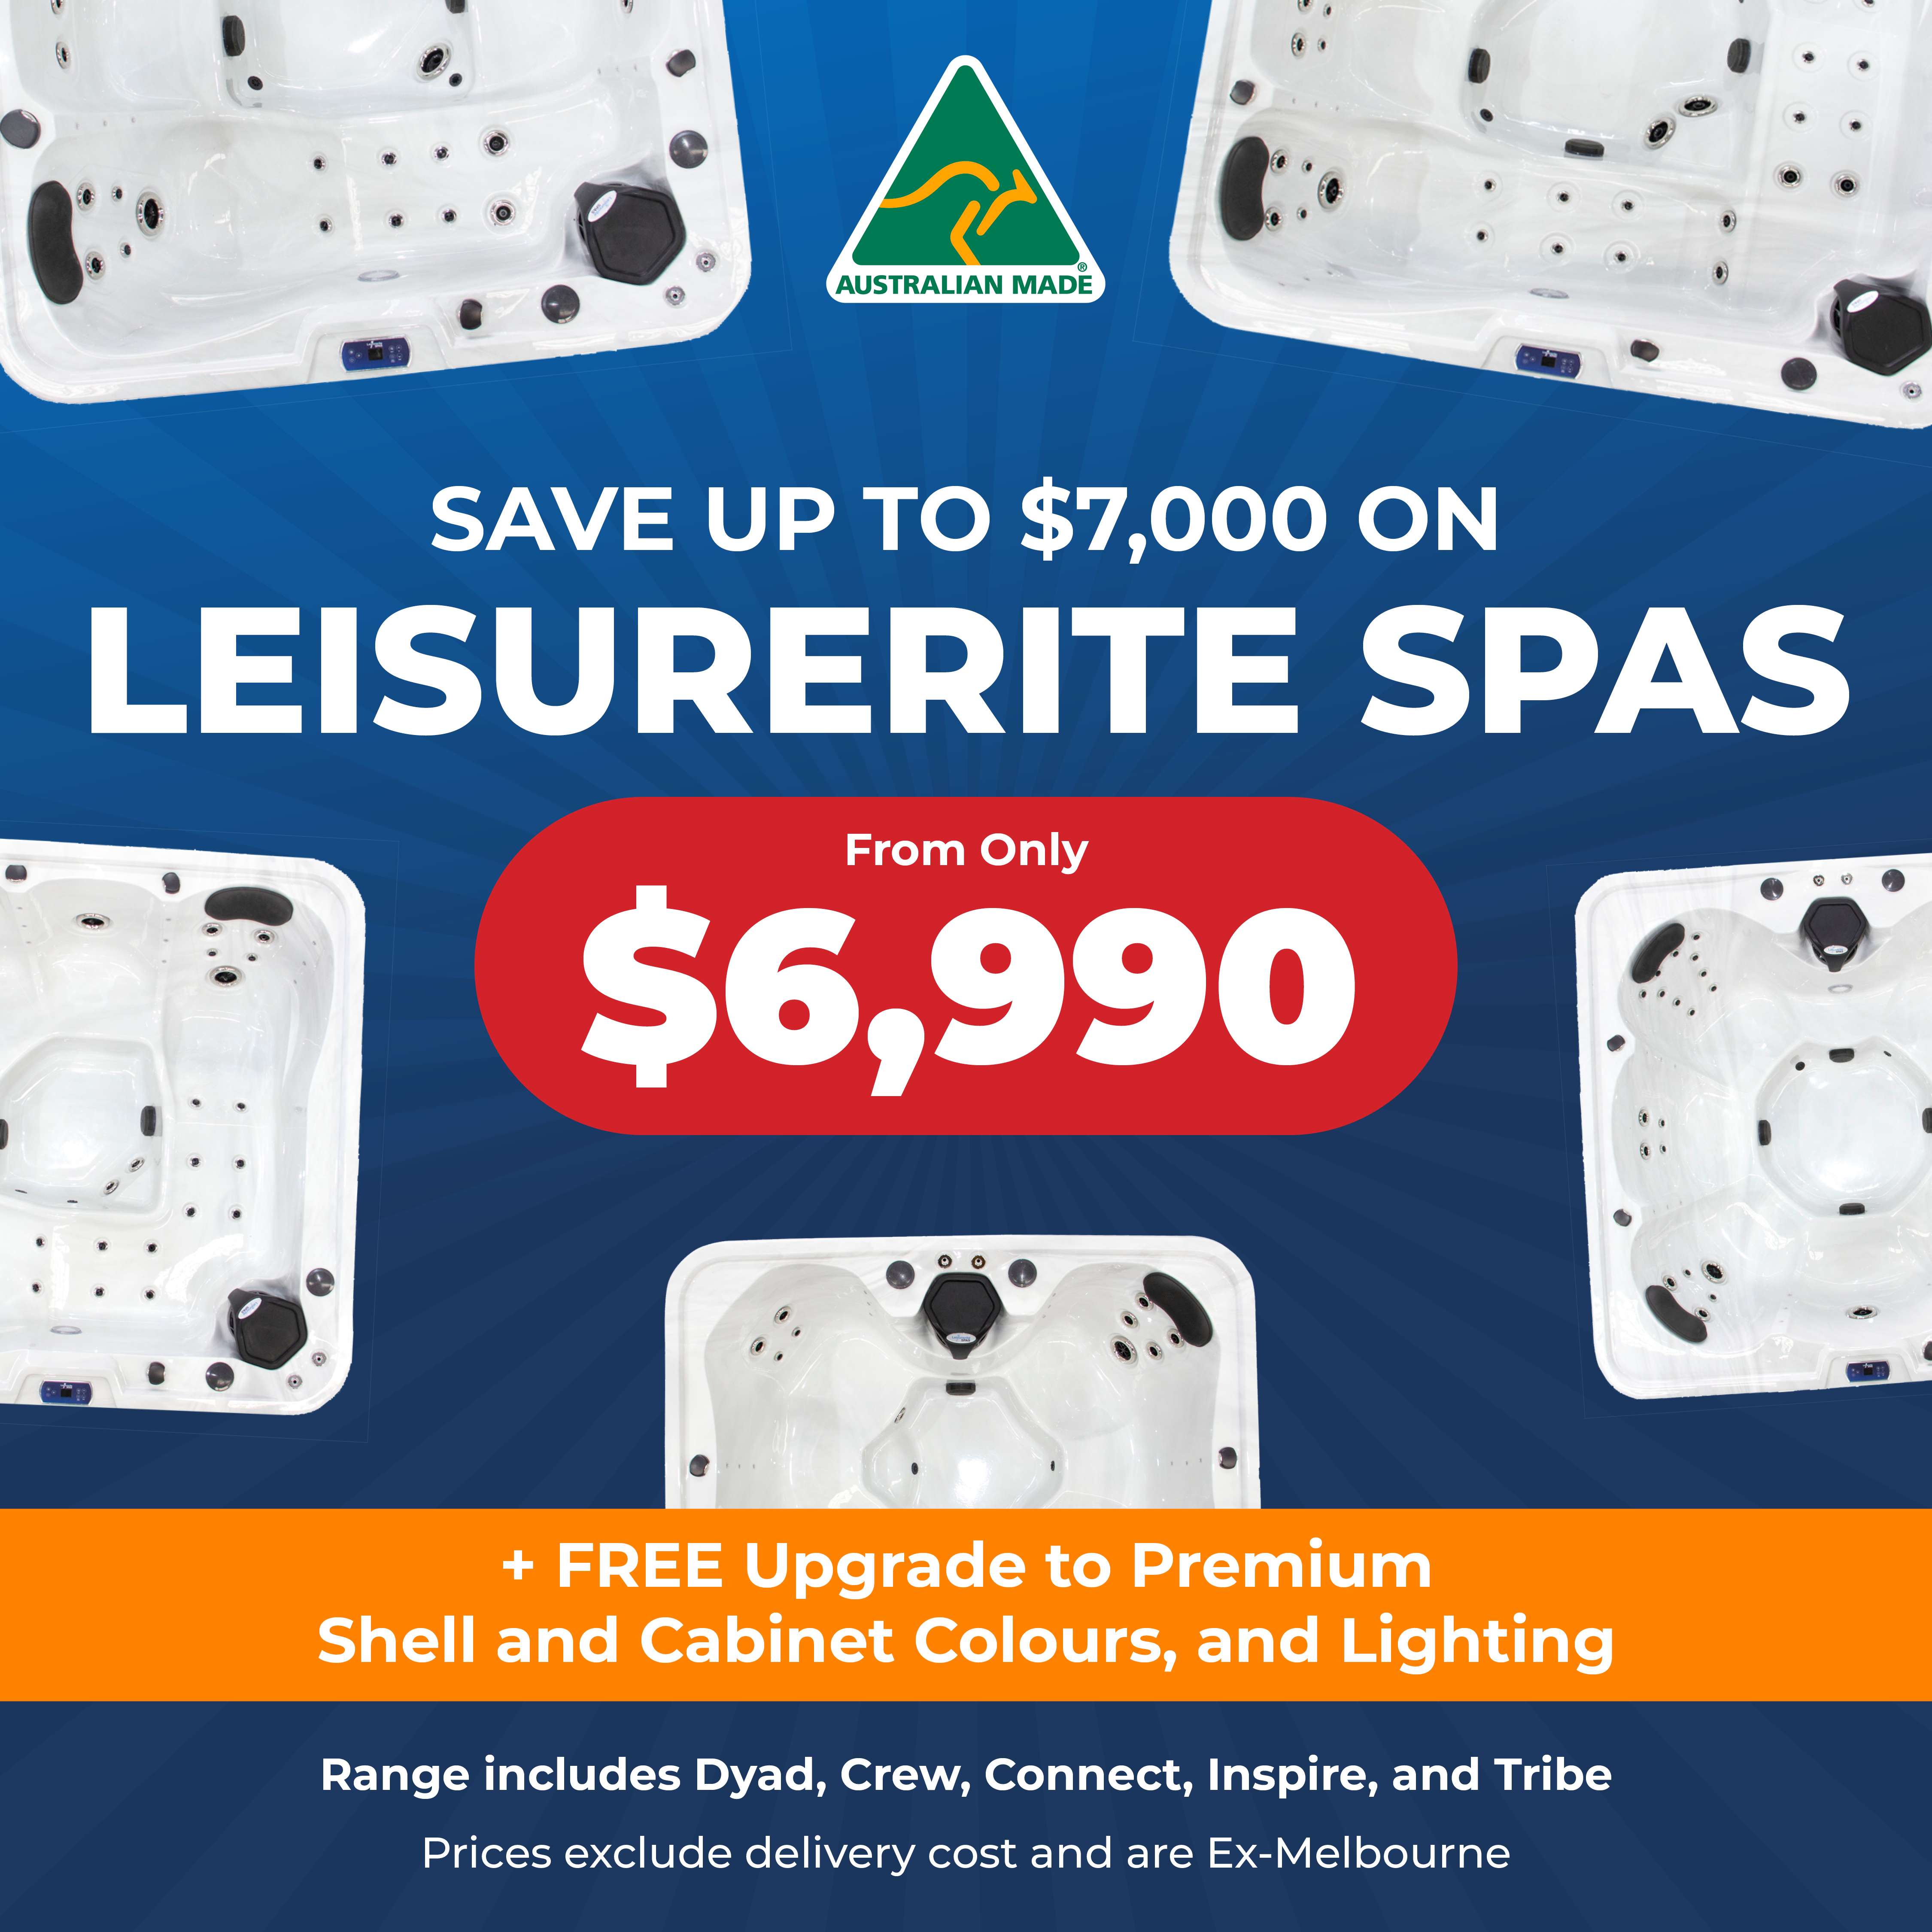 SIG00861028.0324_Just-_Spas_National_April_Offers_BOFPost_FA3